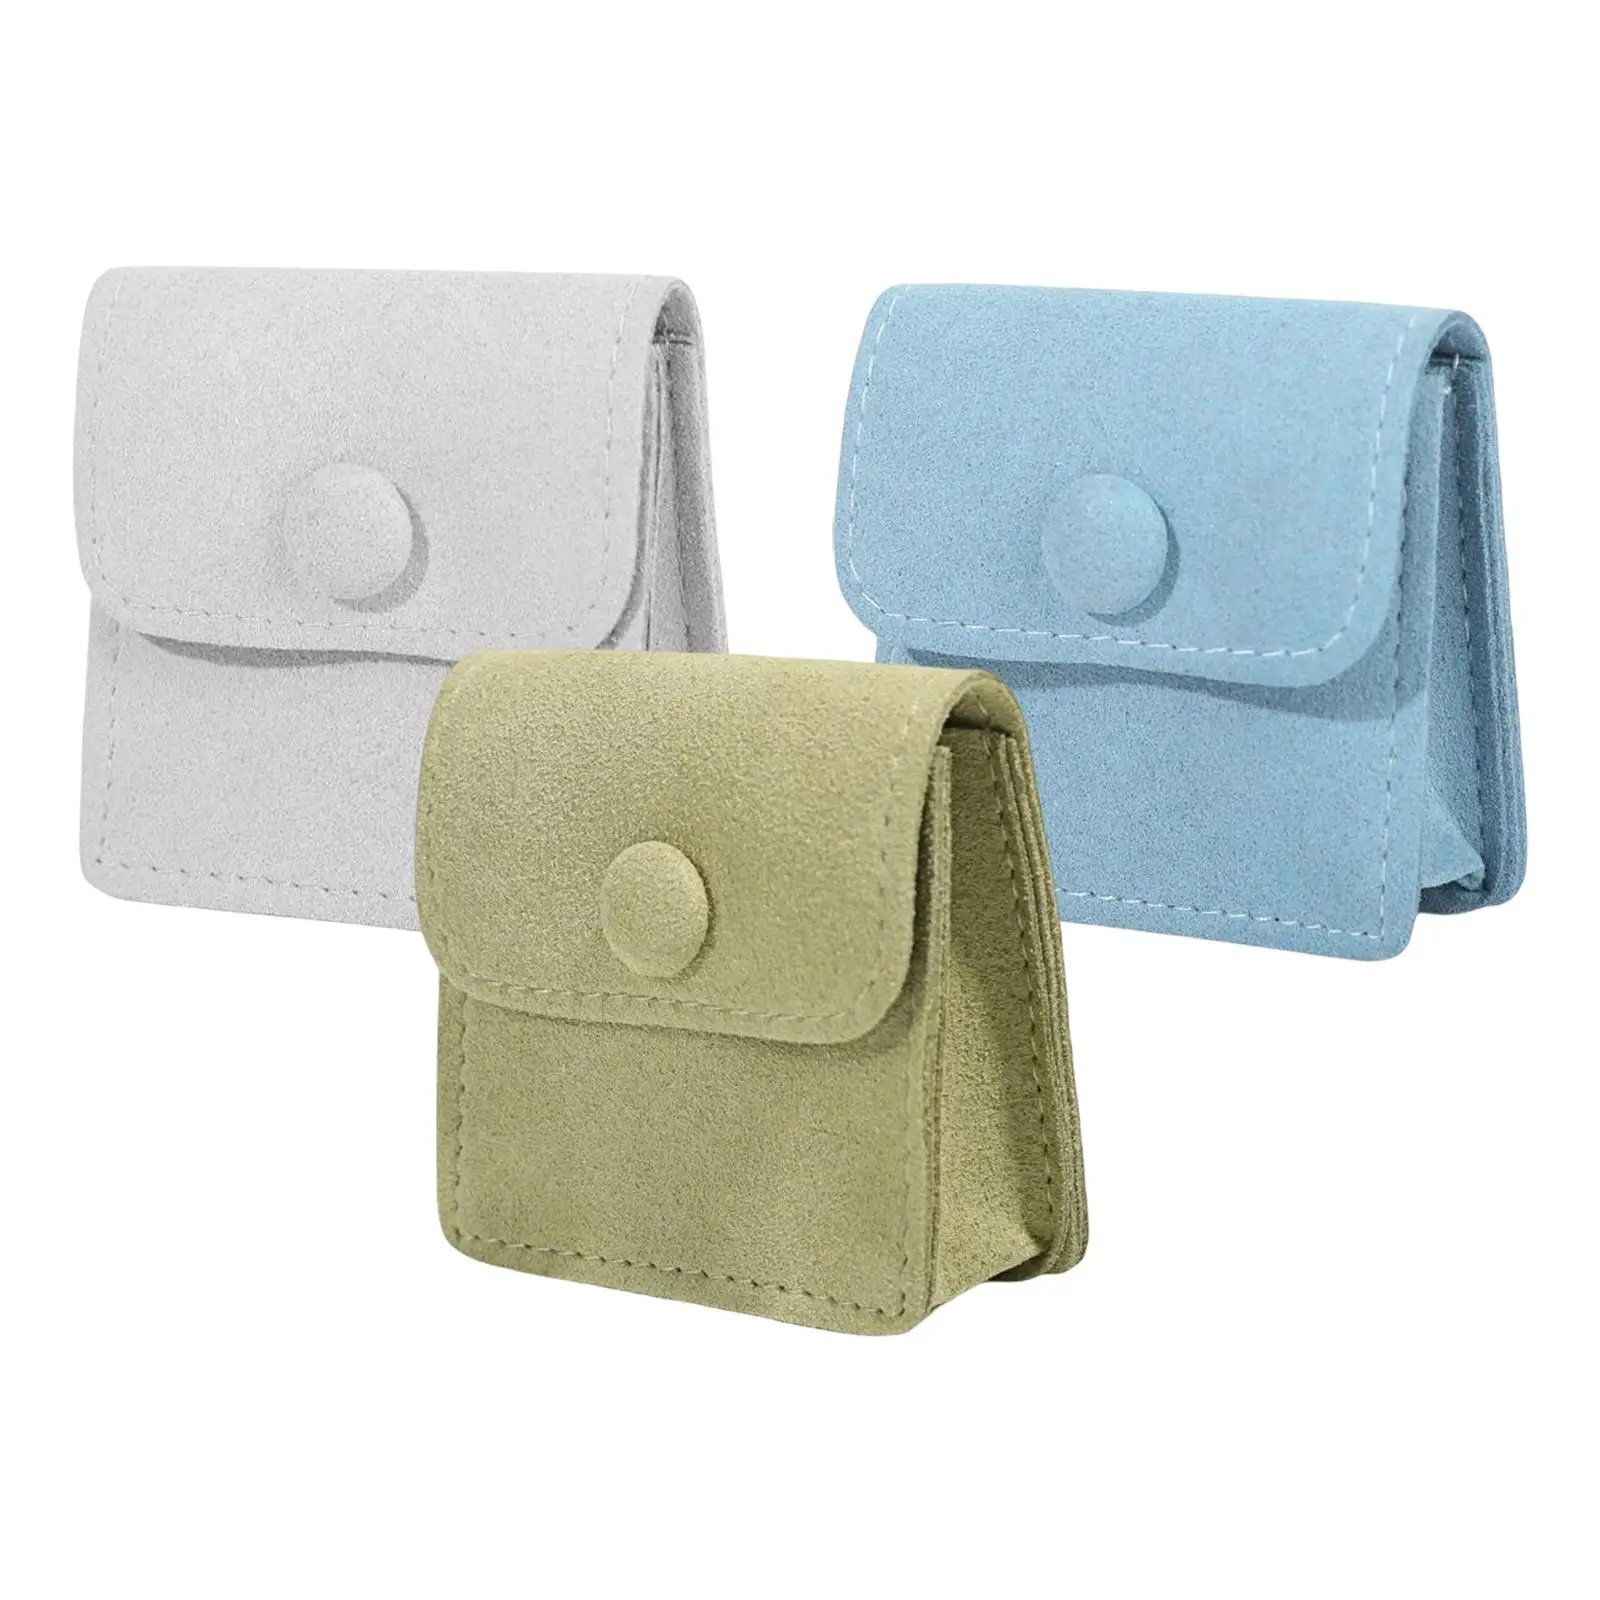 3 Pieces Microfiber Jewelry Pouch Trinket Bag Double Pockets with Snap Button Jewelry Bags for Rings Watch Earrings Gift Travel